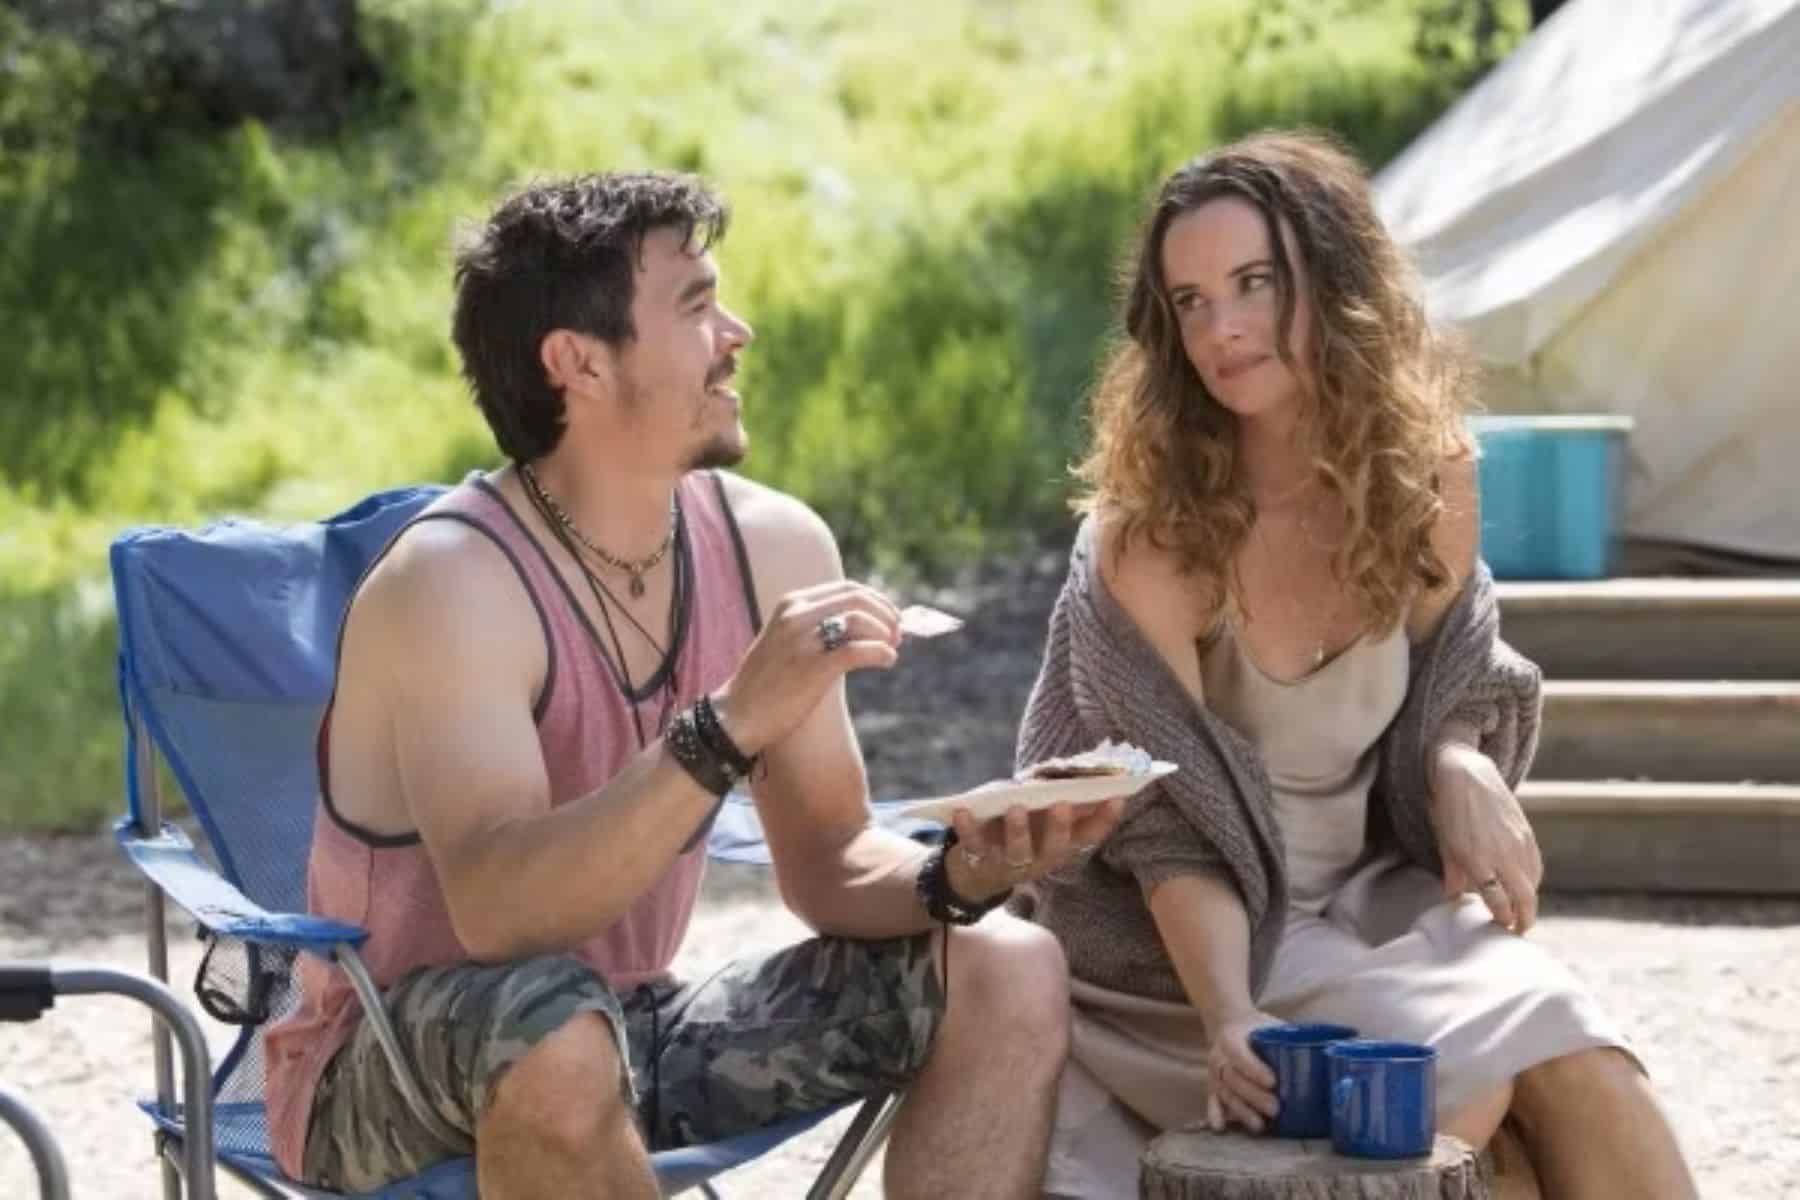 A man and a woman sit at a campsite and have a discussion in this image from Baby Cow Productions.